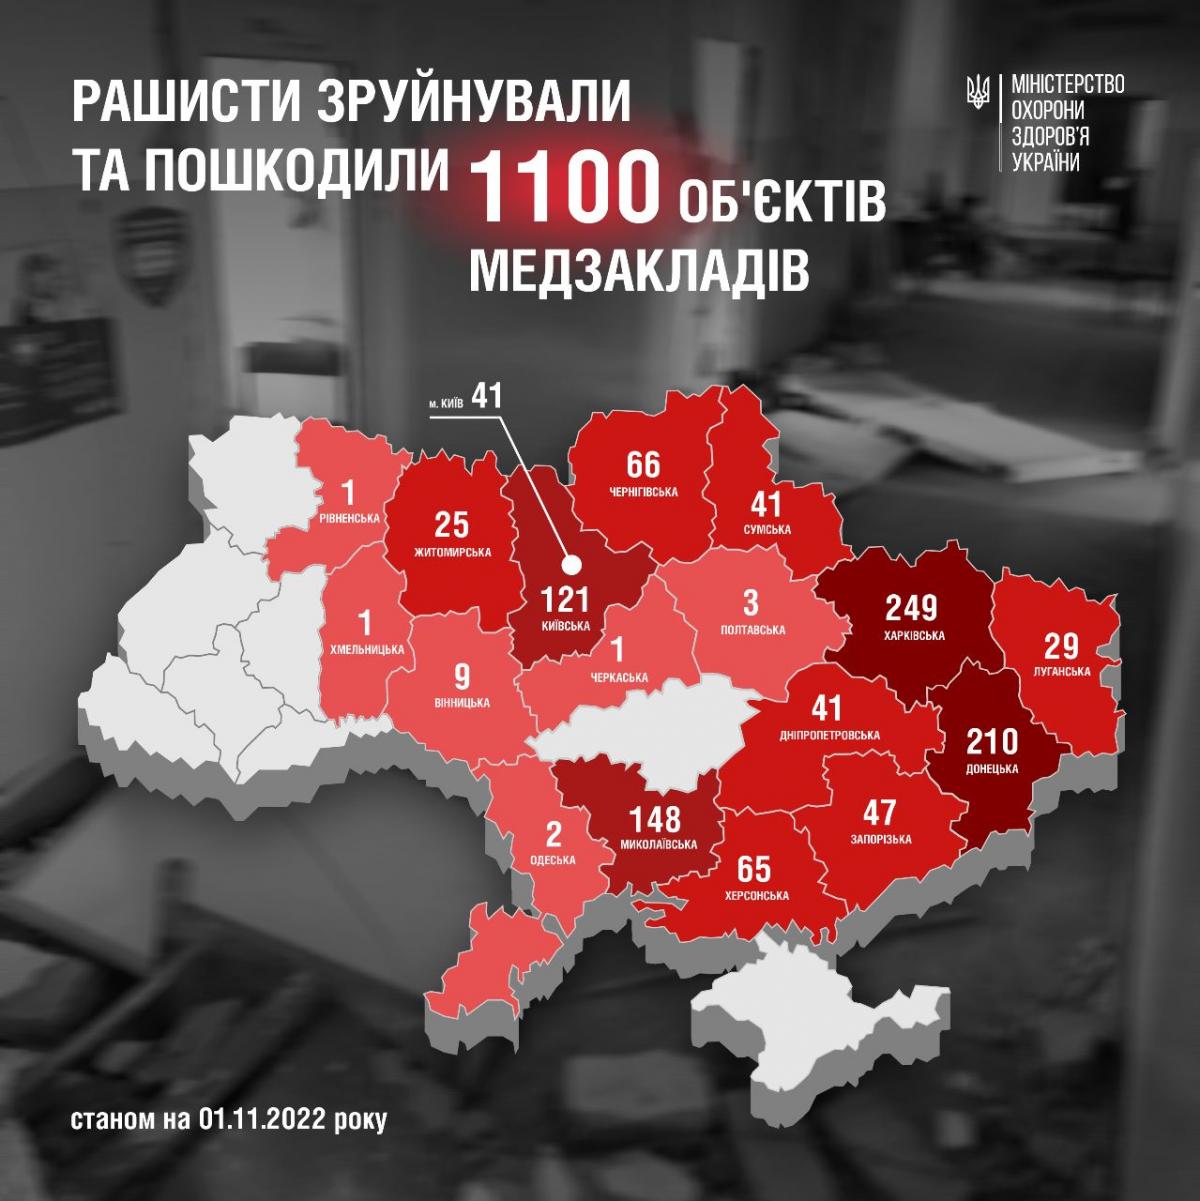 Statistics on destroyed medical facilities / photo by the Ministry of Health